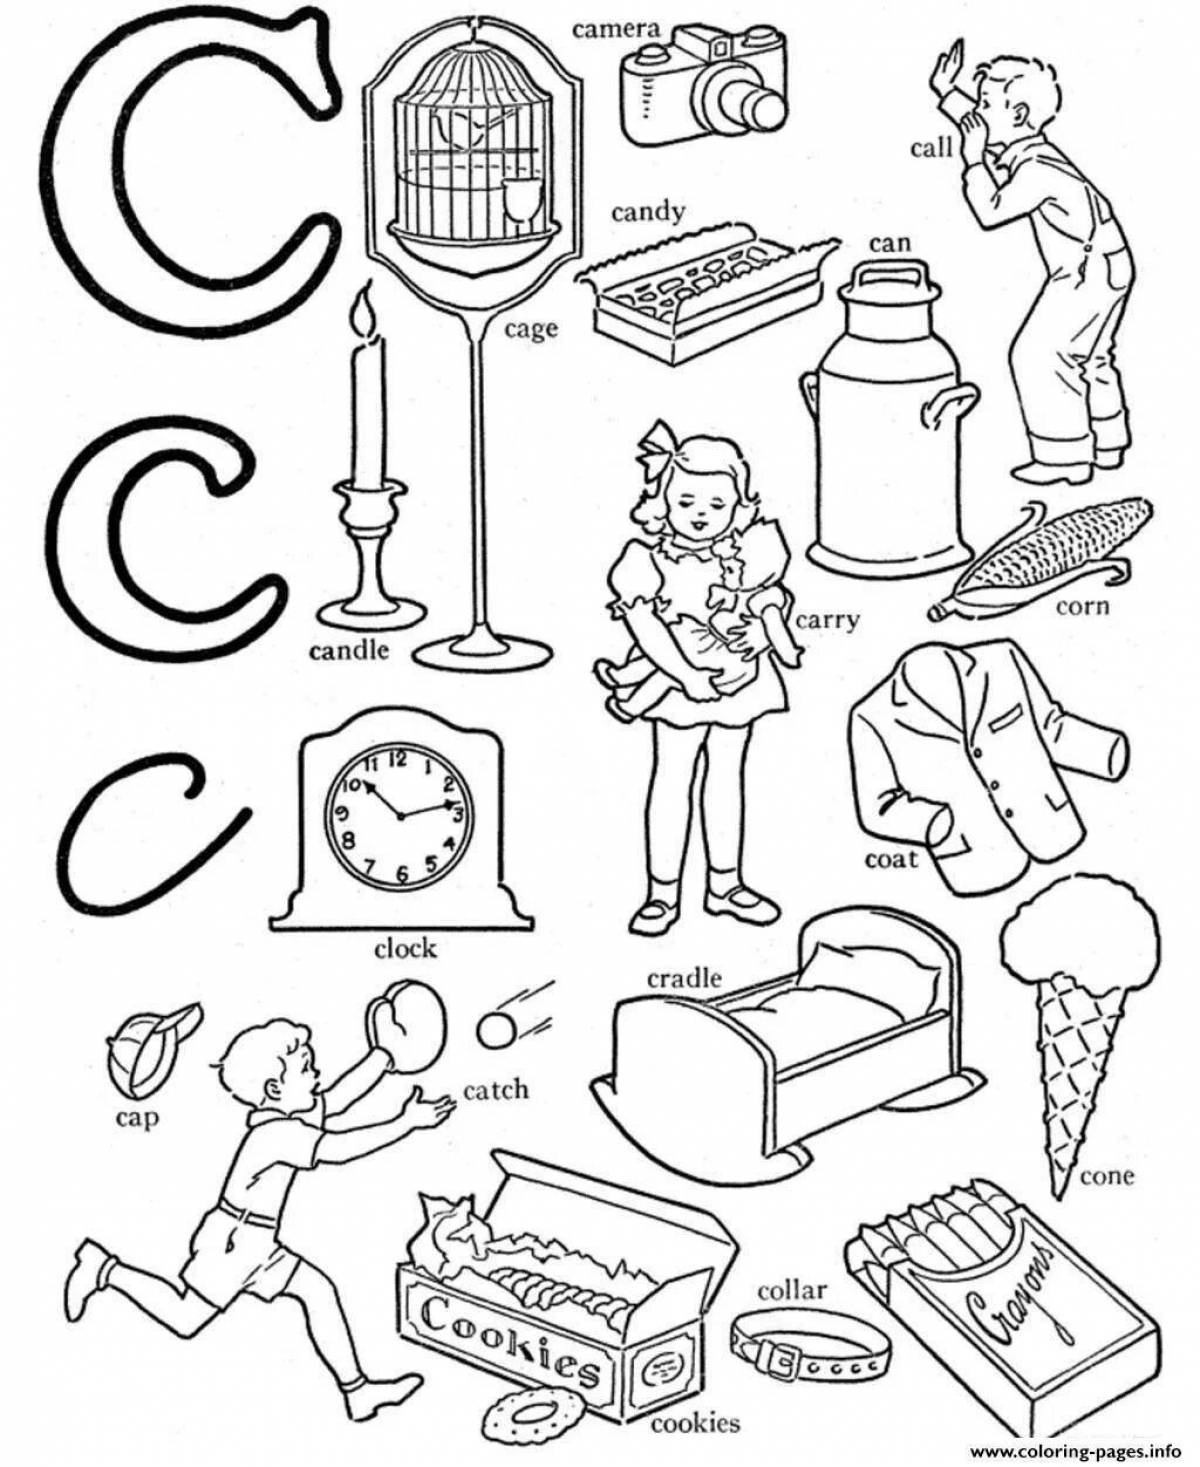 A joyful coloring book for kids in English